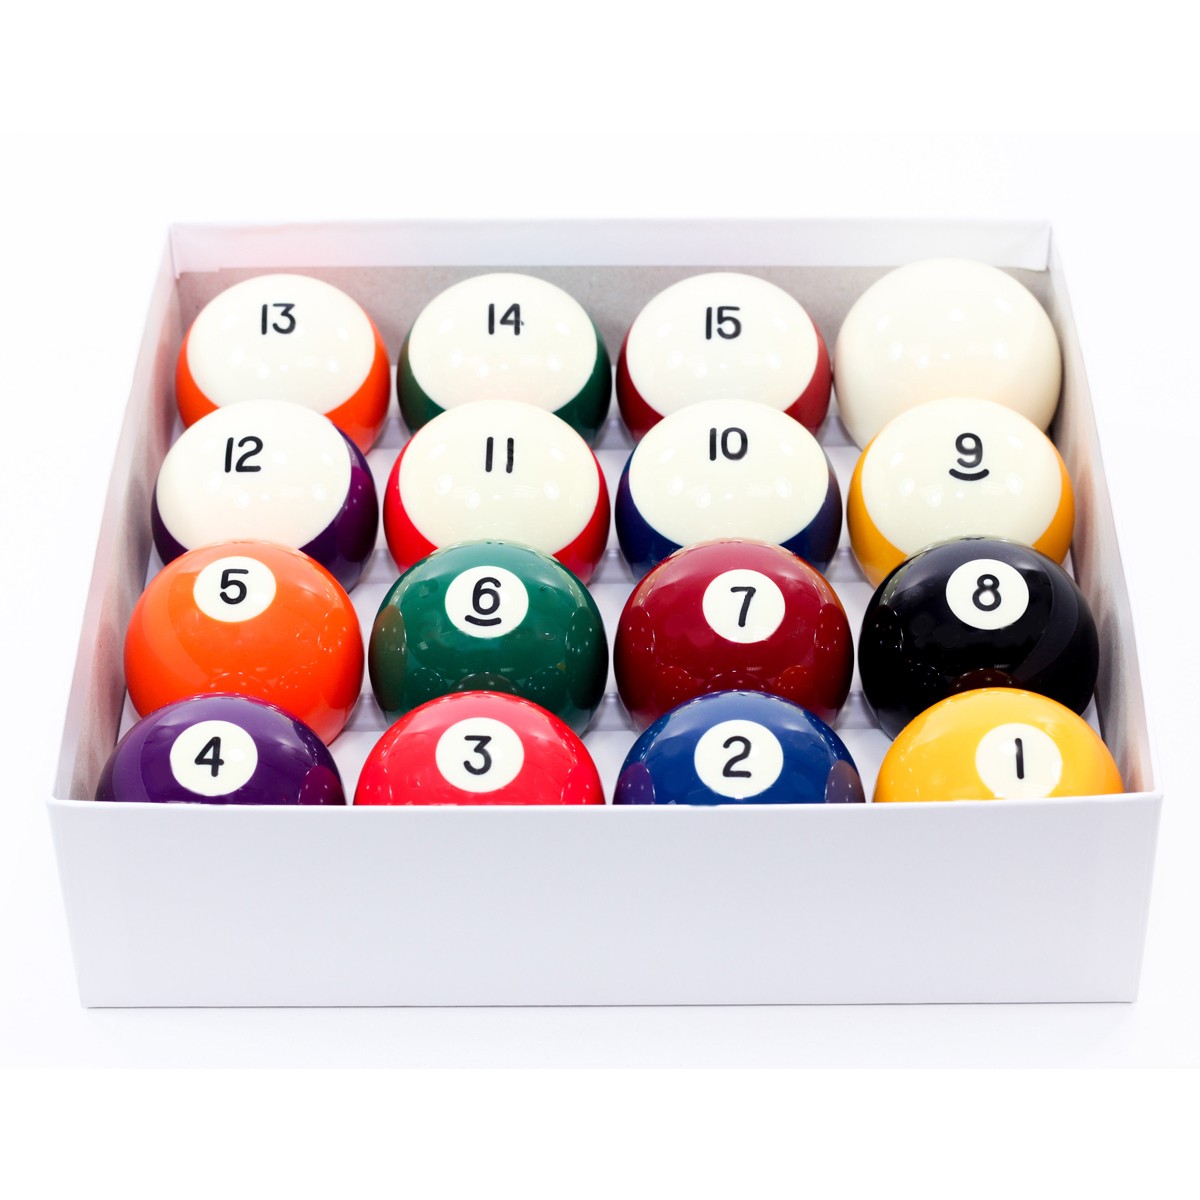 11-150coin 2.38 In. Billiard Ball Set For Coin Operated